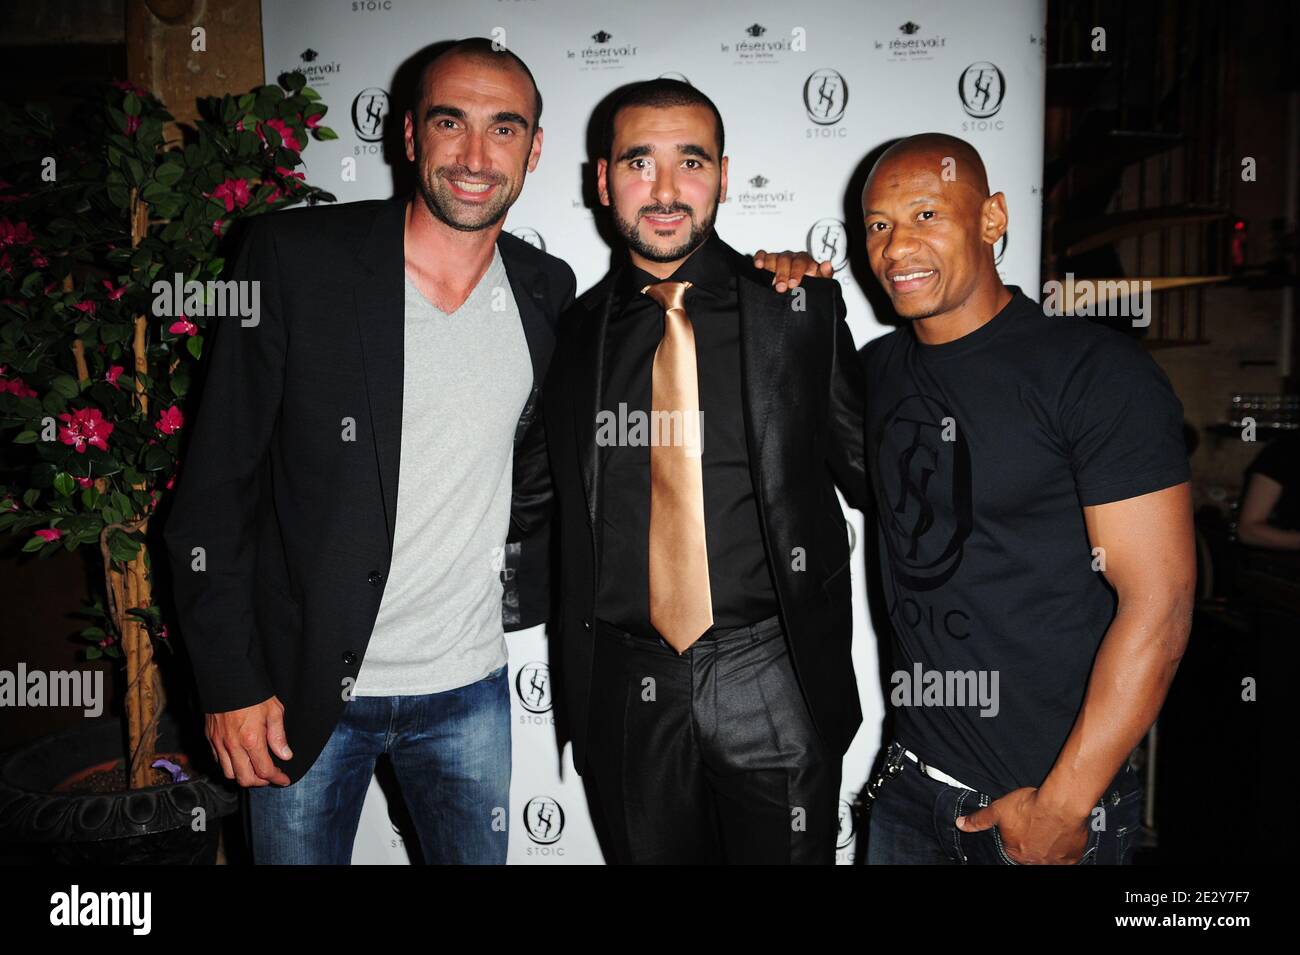 Jerome Alonzo, Hakim Mimoun (President of Stoic) and Said (Iam) attending 'Stoic Party' for the launch of the brand held at the Reservoir in Paris, France on June 3, 2010. Photo by Nicolas Briquet/ABACAPRESS.COM Stock Photo